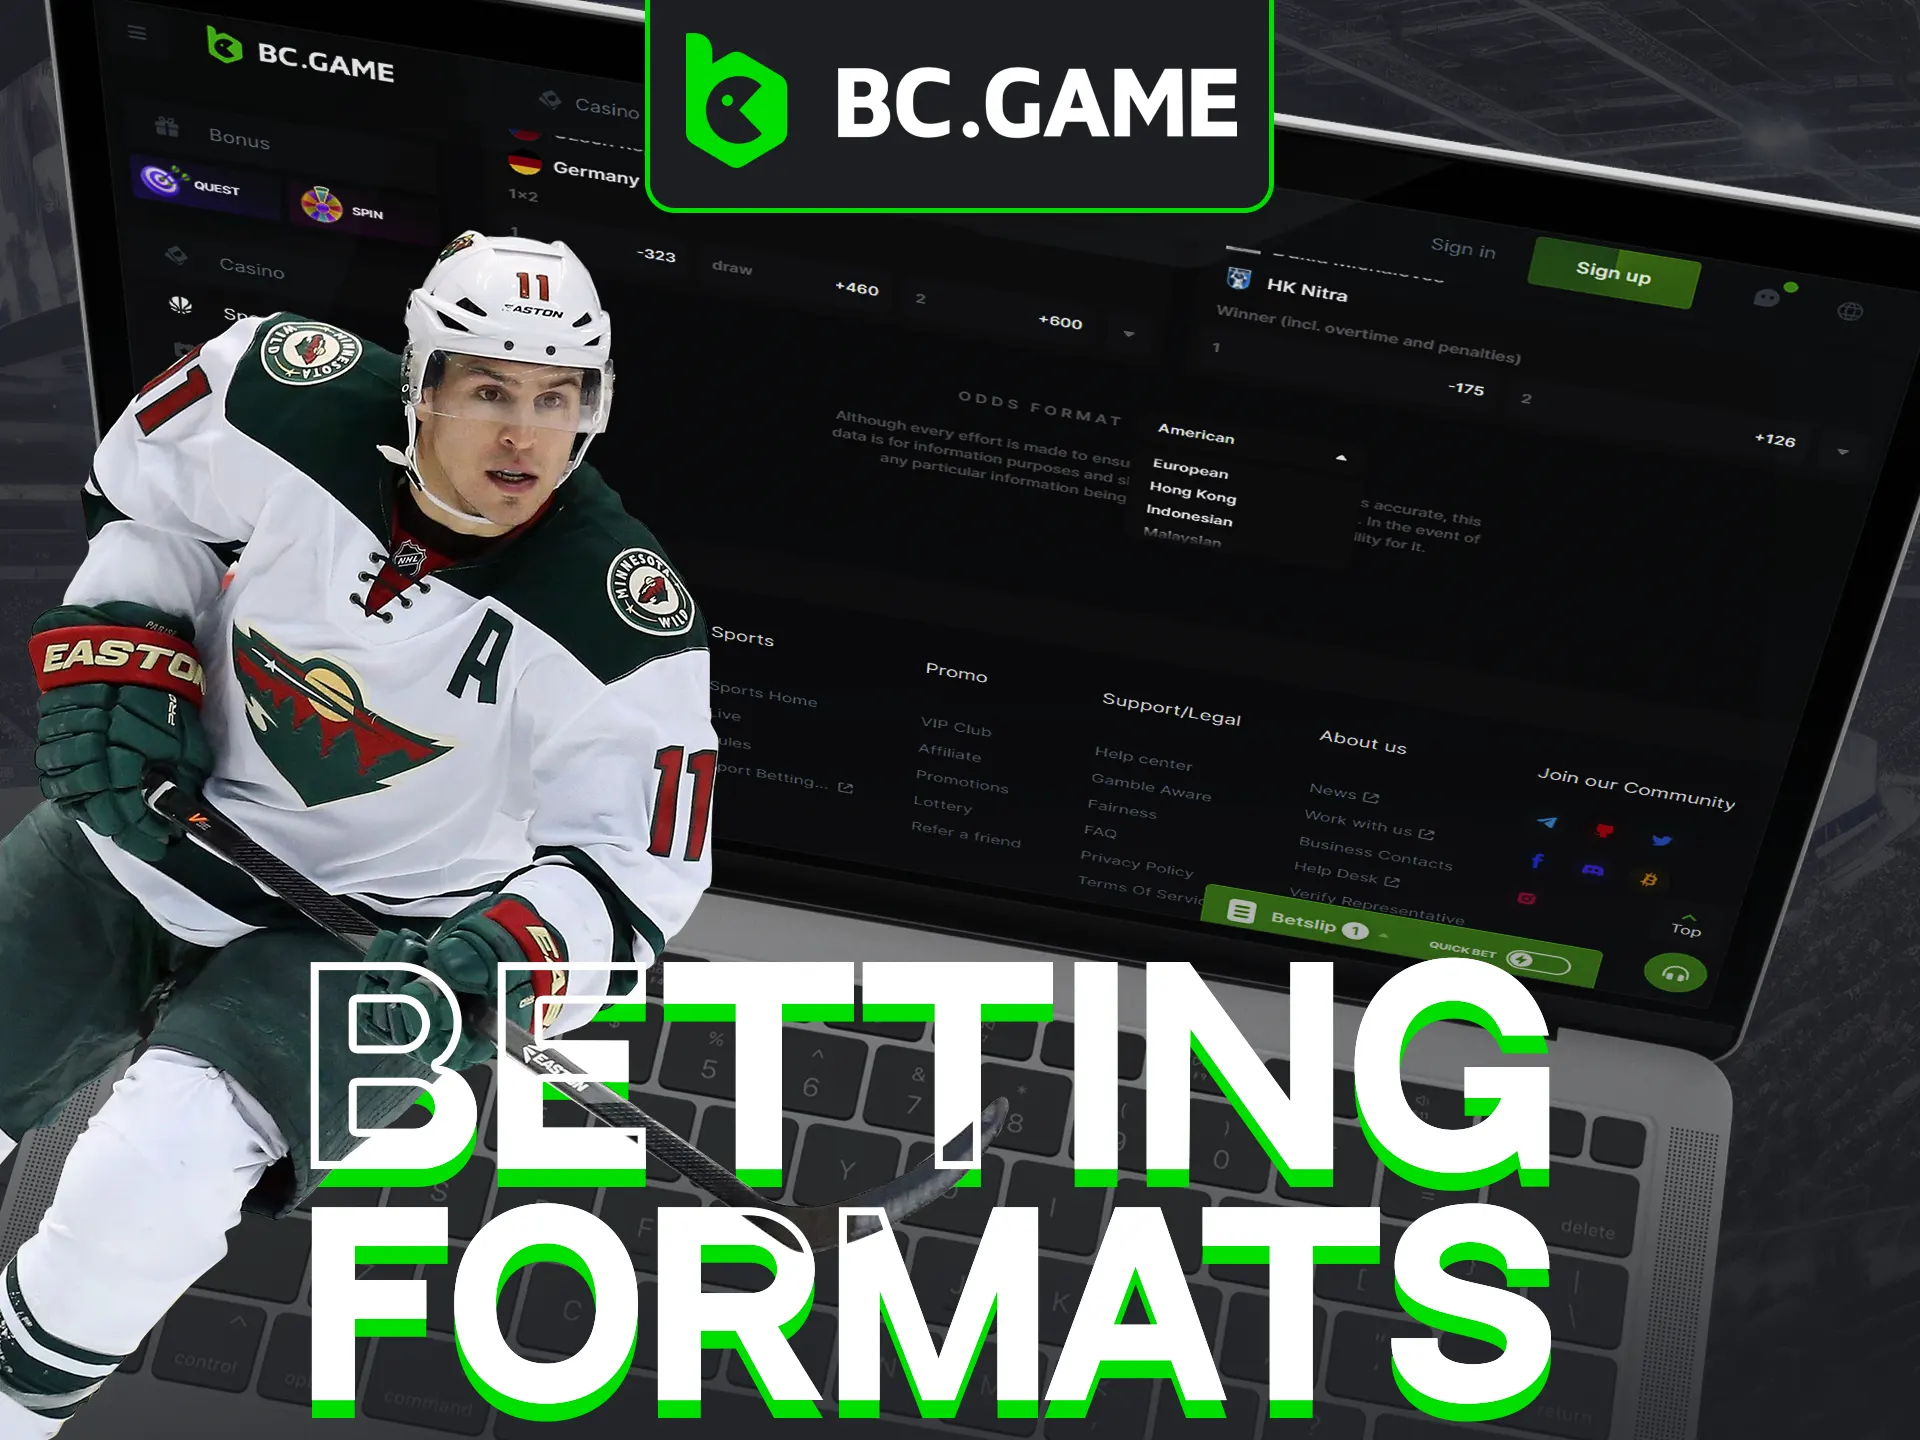 BC Game offers various ice hockey betting formats.